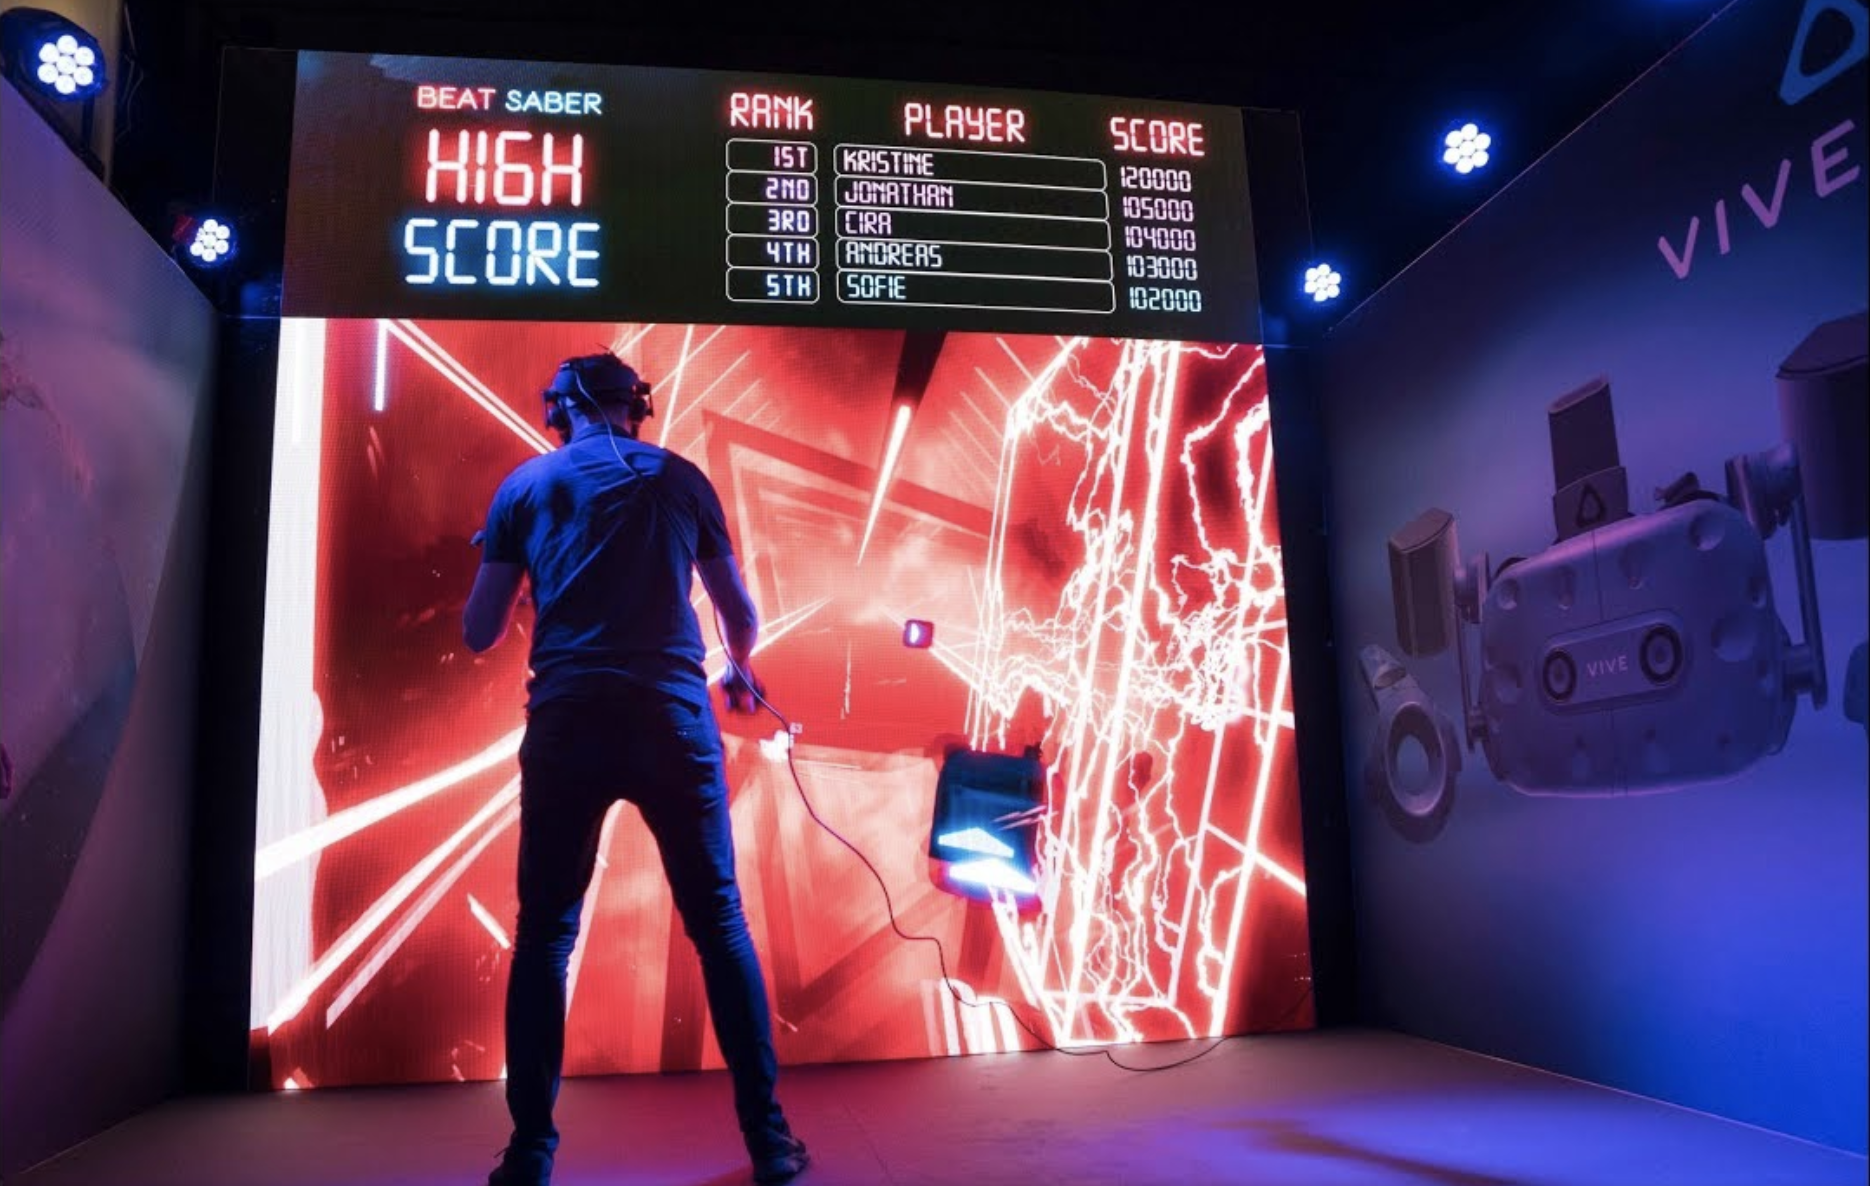 Creating Europe's VR Experience Together with HTC VIVE & BEAT SABER